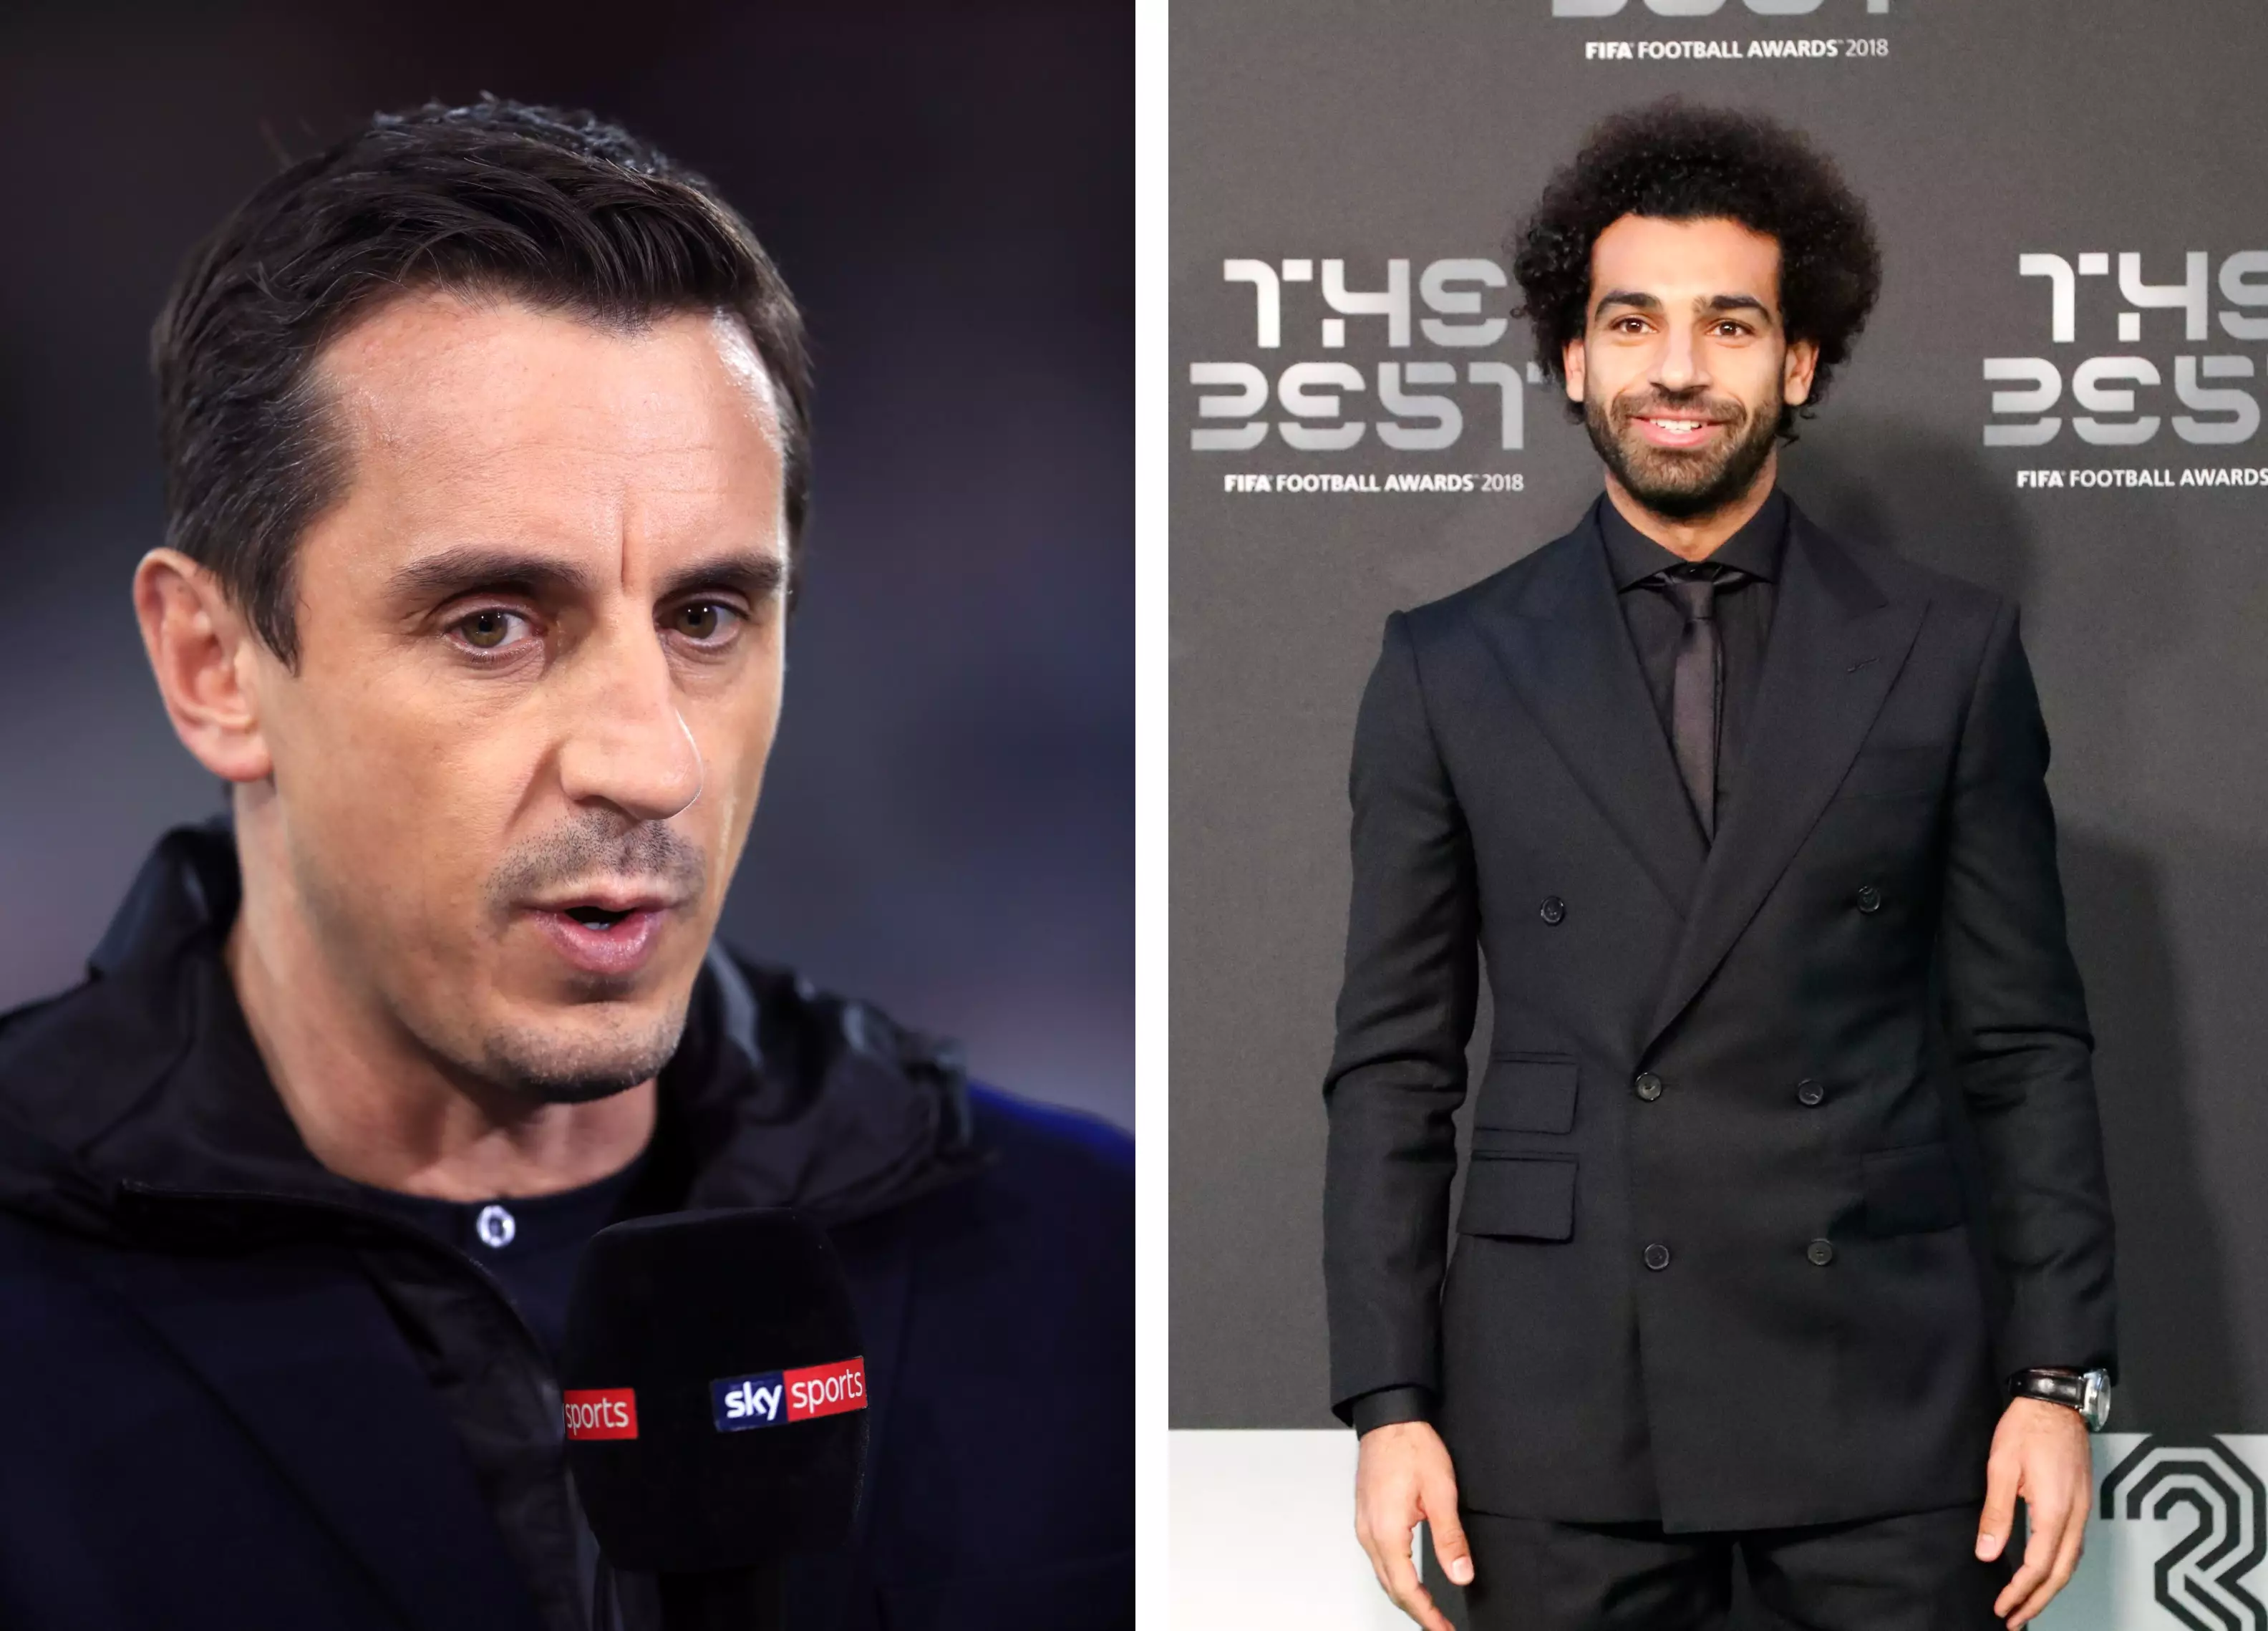 Salah Creates Awkward Moment For Gary Neville After Snubbing Interview Request